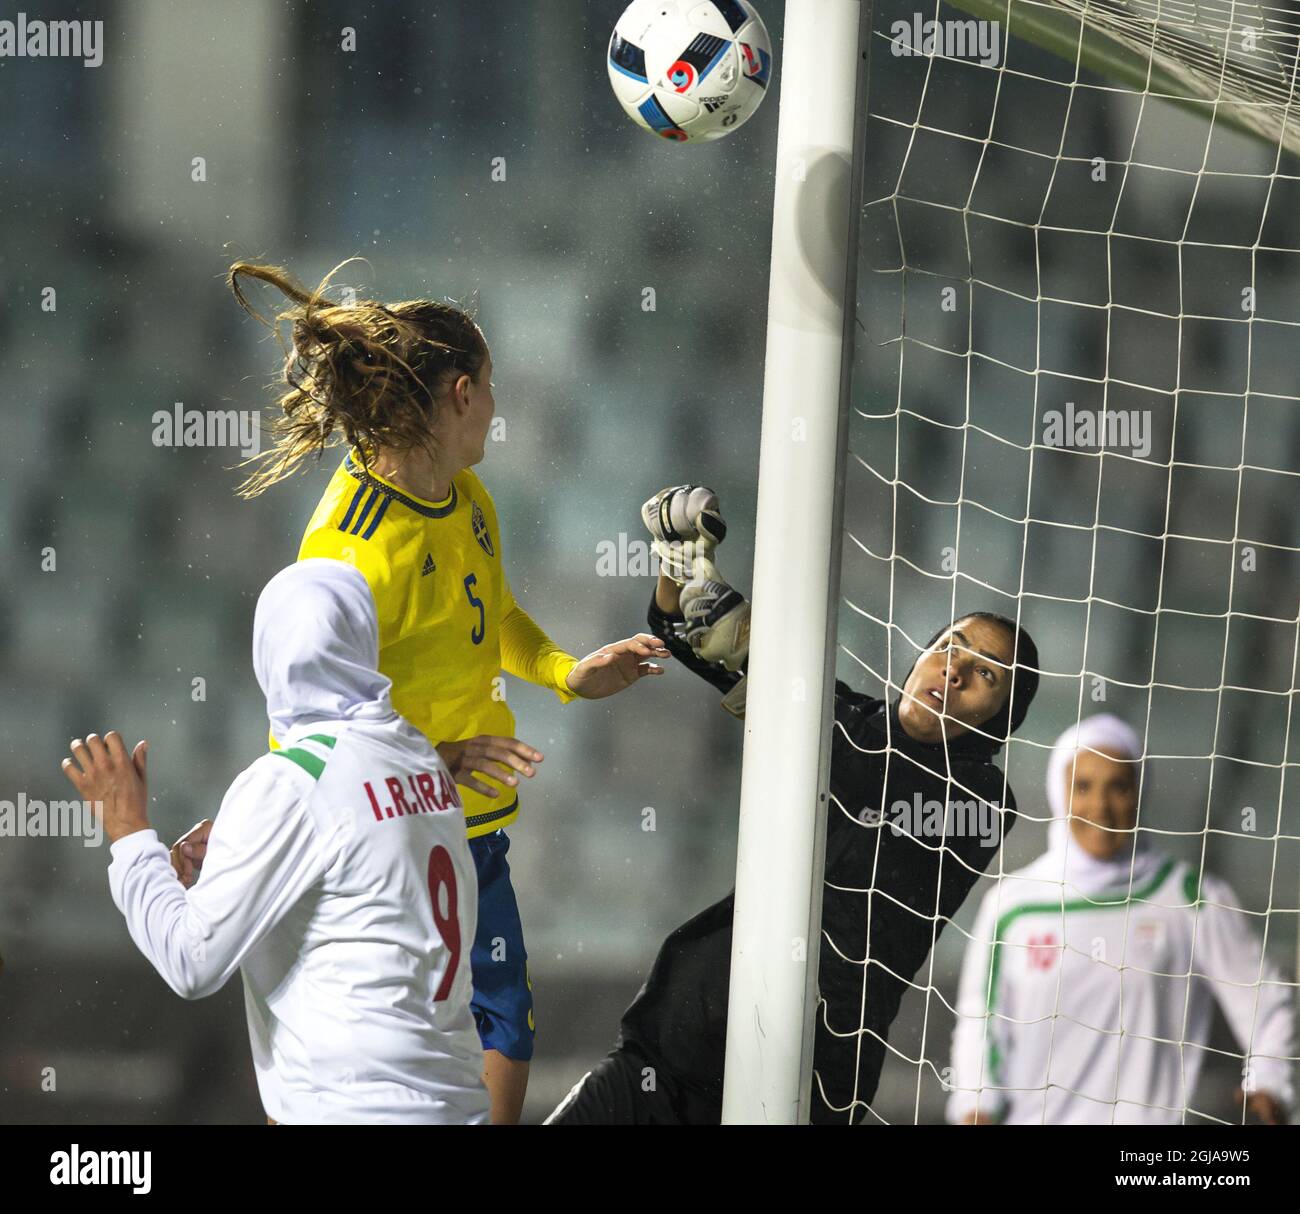 Iran's goalkeeper Mahdeyeh Molai (R) boxes the ball in front of Sweden's Nathalie Bjorn and Iran's Zahra Ghanbari during the international friendly soccer match between Sweden and Iran at the Old Ullevi Soccer Stadium in Goteborg, Sweden, October 21, 2016. Photo Thomas Johansson / TT / Kod 9200 ** SWEDEN OUT **  Stock Photo